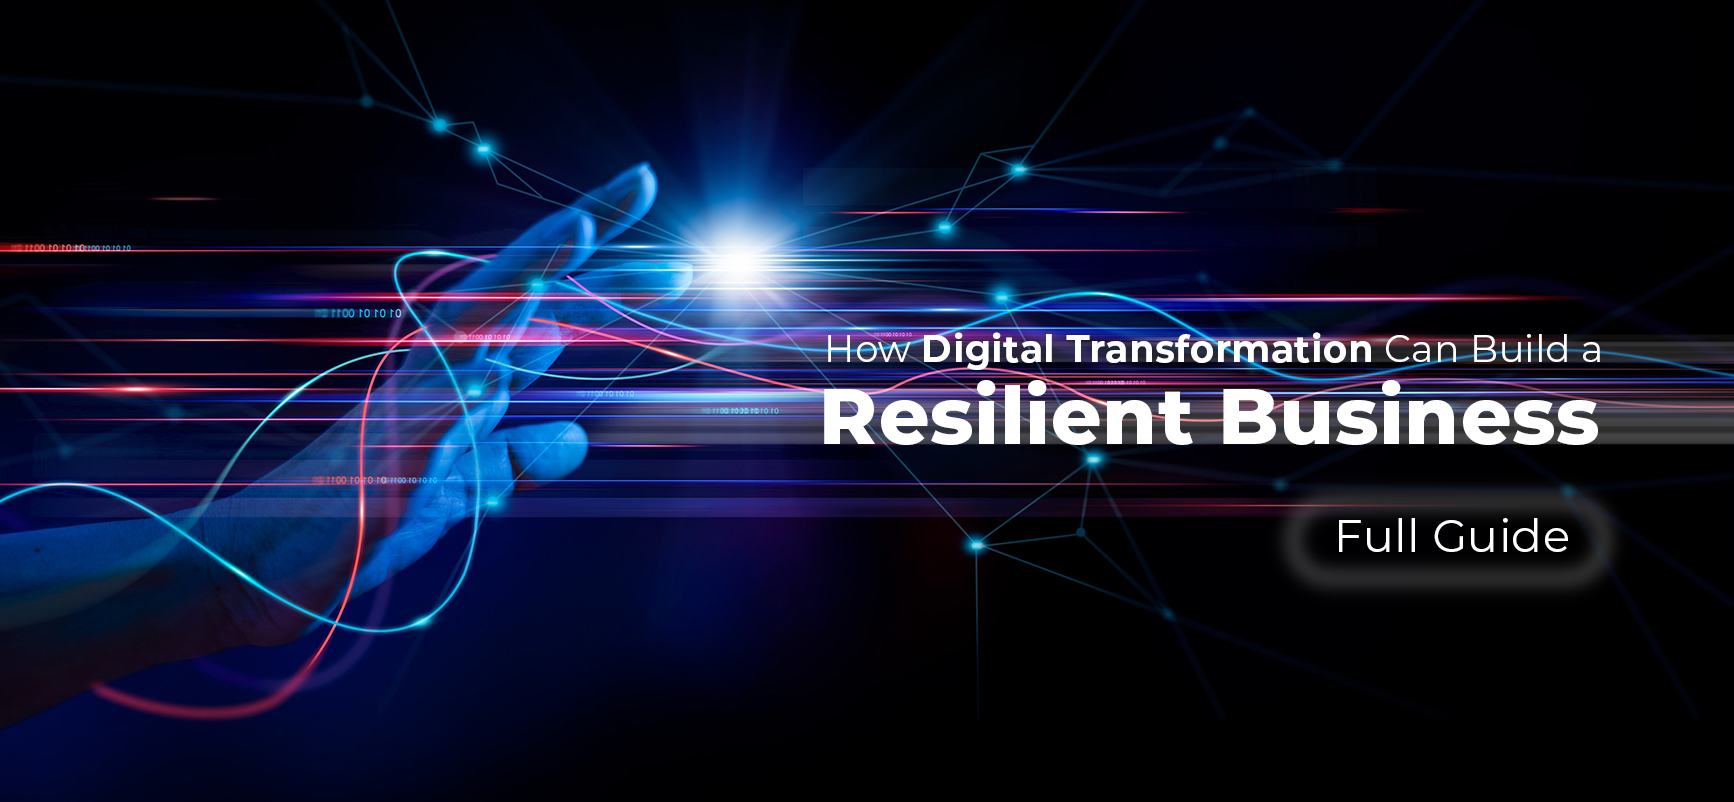 How Digital Transformation Can Build a Resilient Business: Full Guide